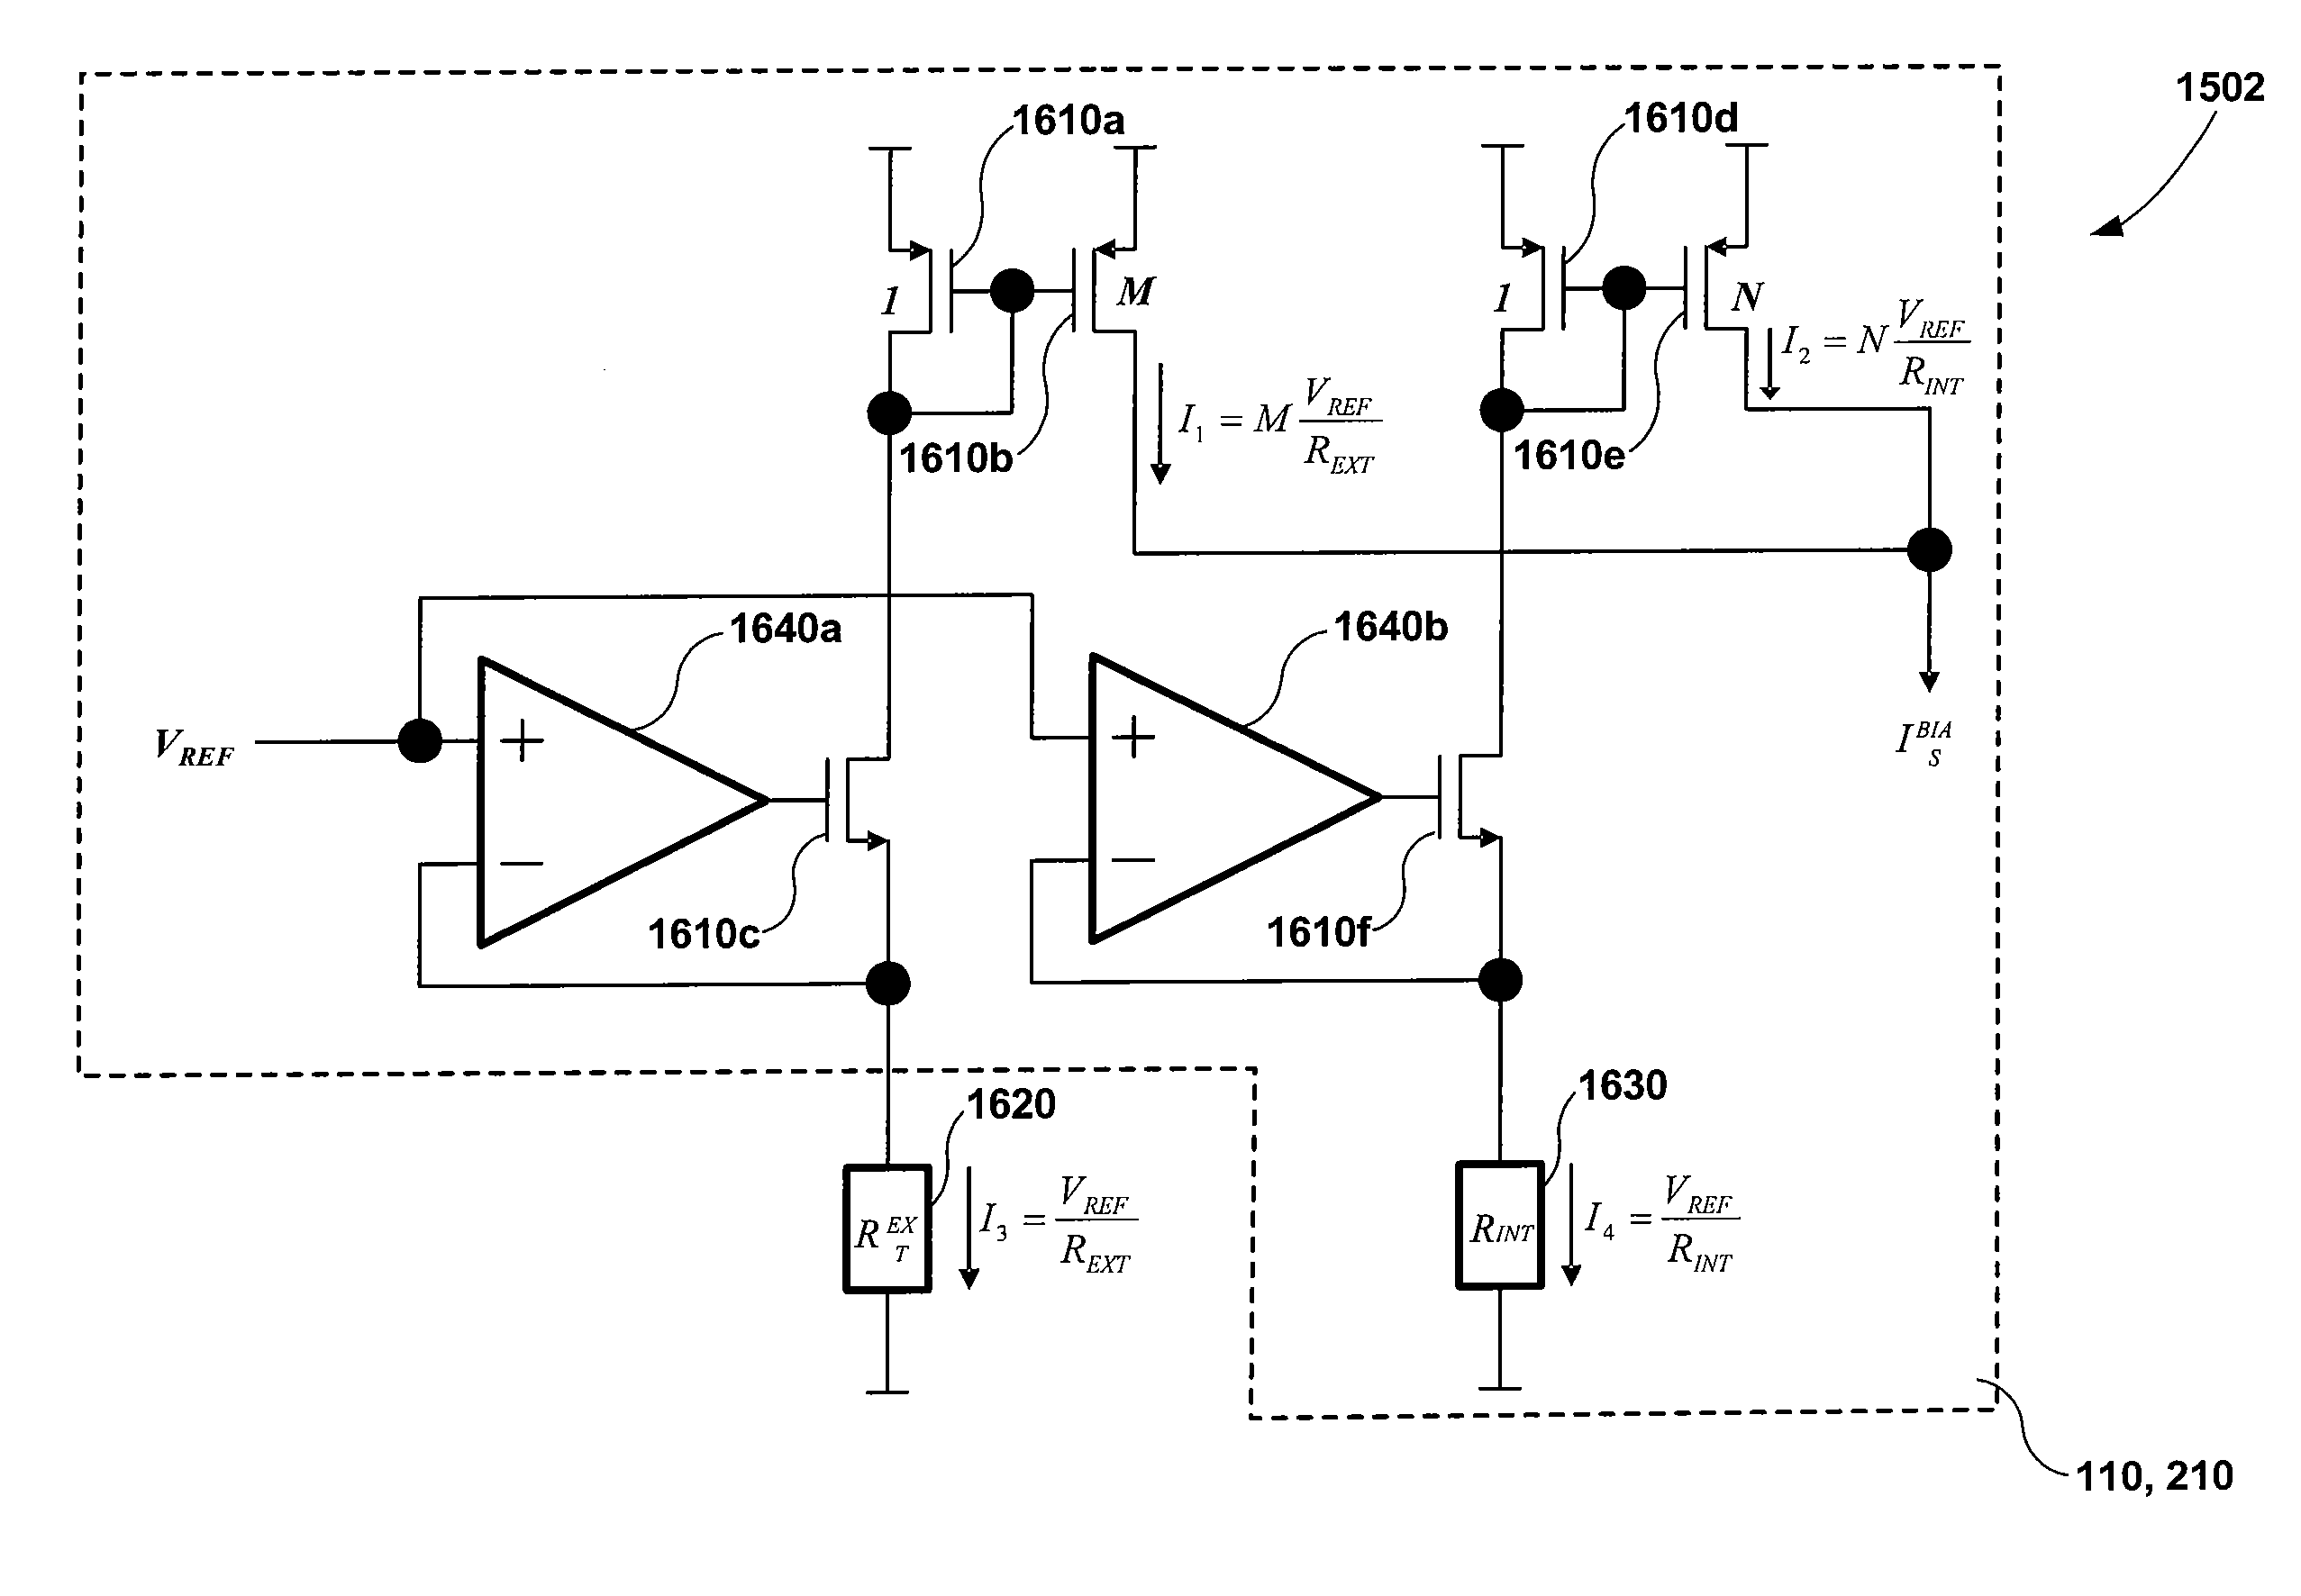 On-Chip Source Termination in Communication Systems